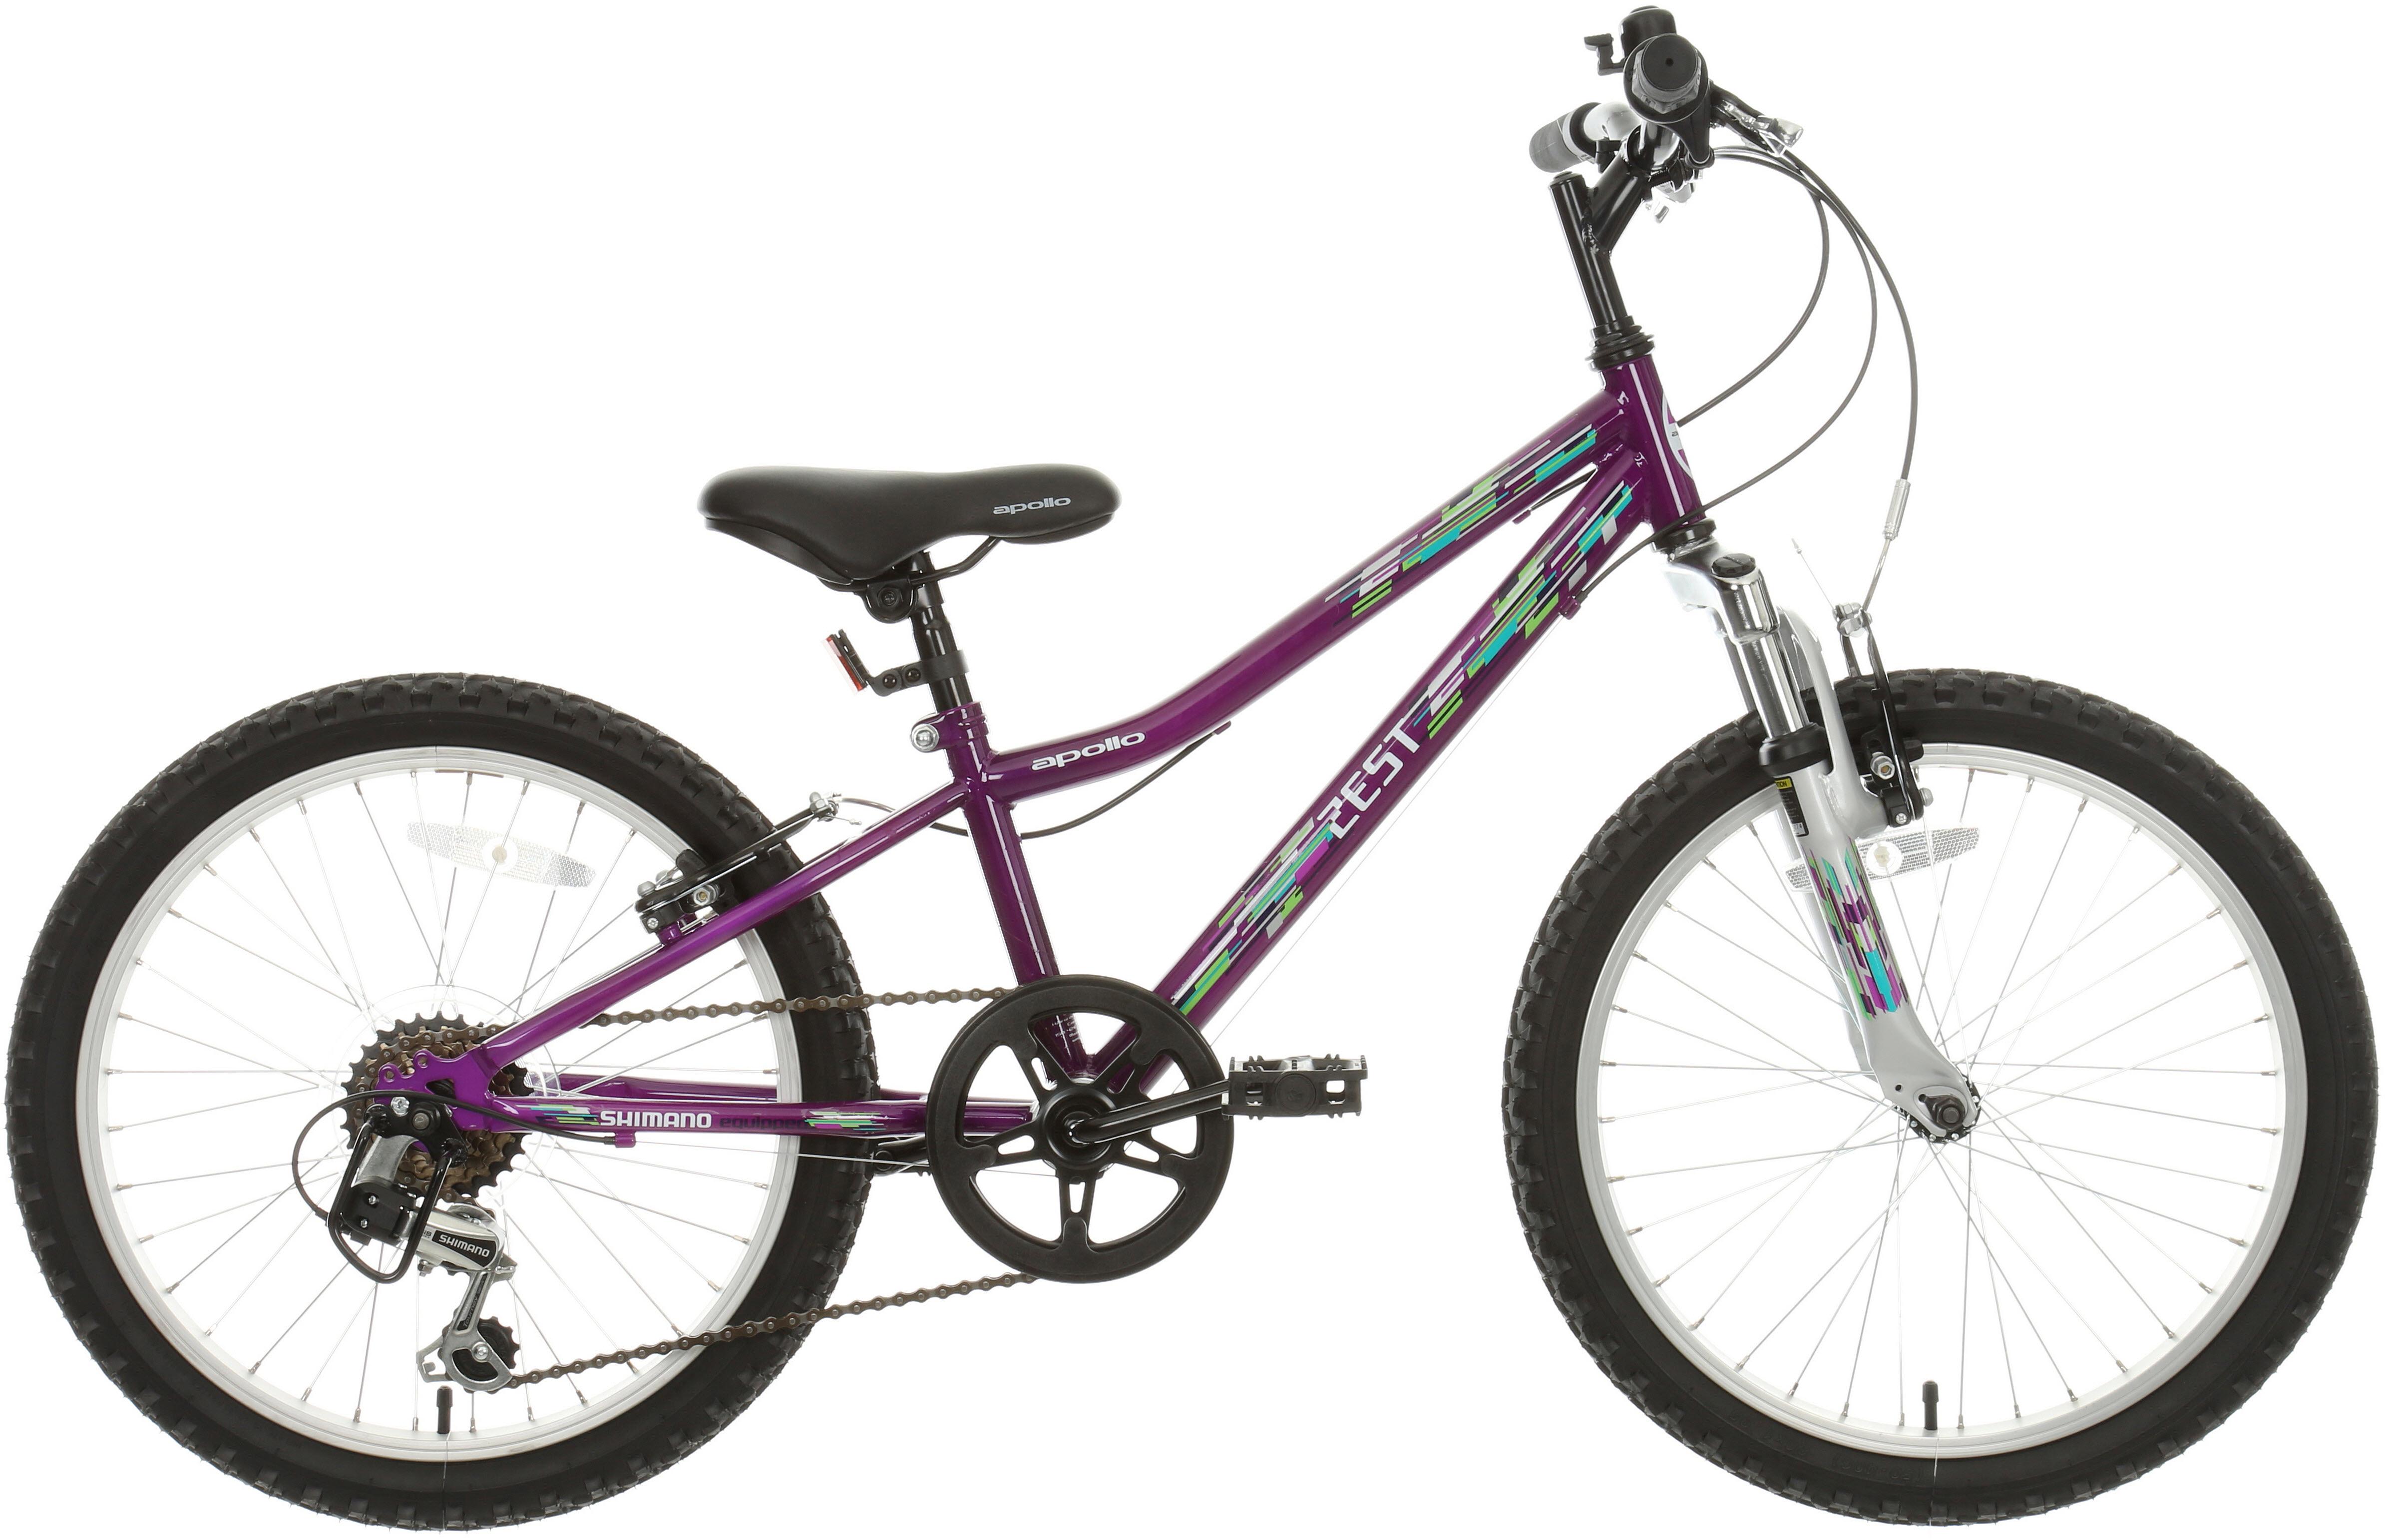 atlas cycle 18 inch price